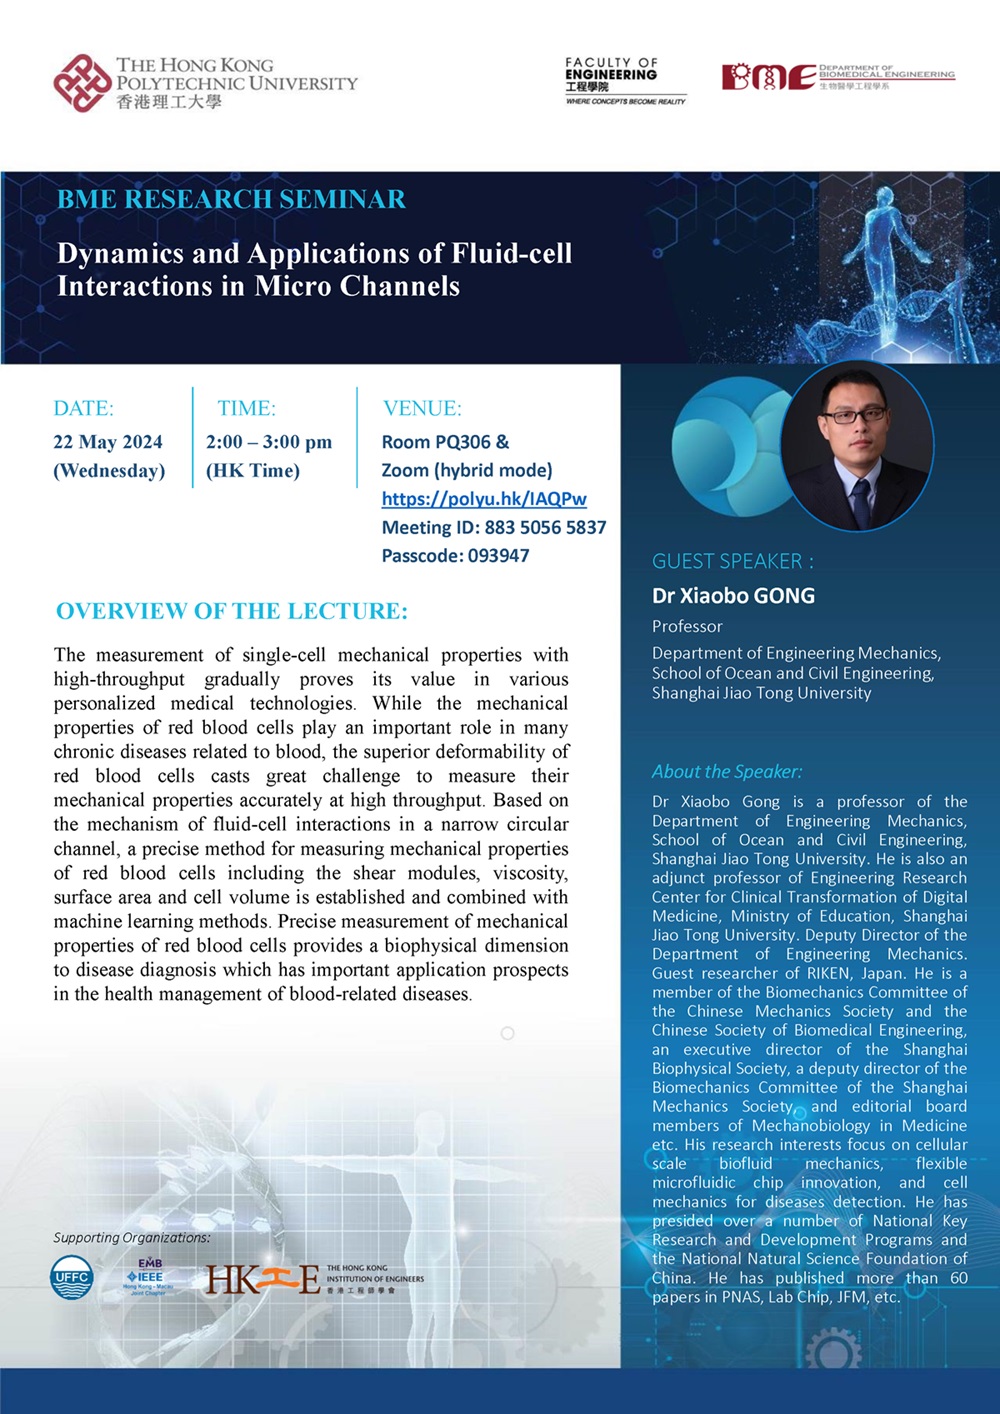 Seminar Poster_20240522_Dynamics and Applications of Fluid-cell Interactions_Dr Xiaobo GONG